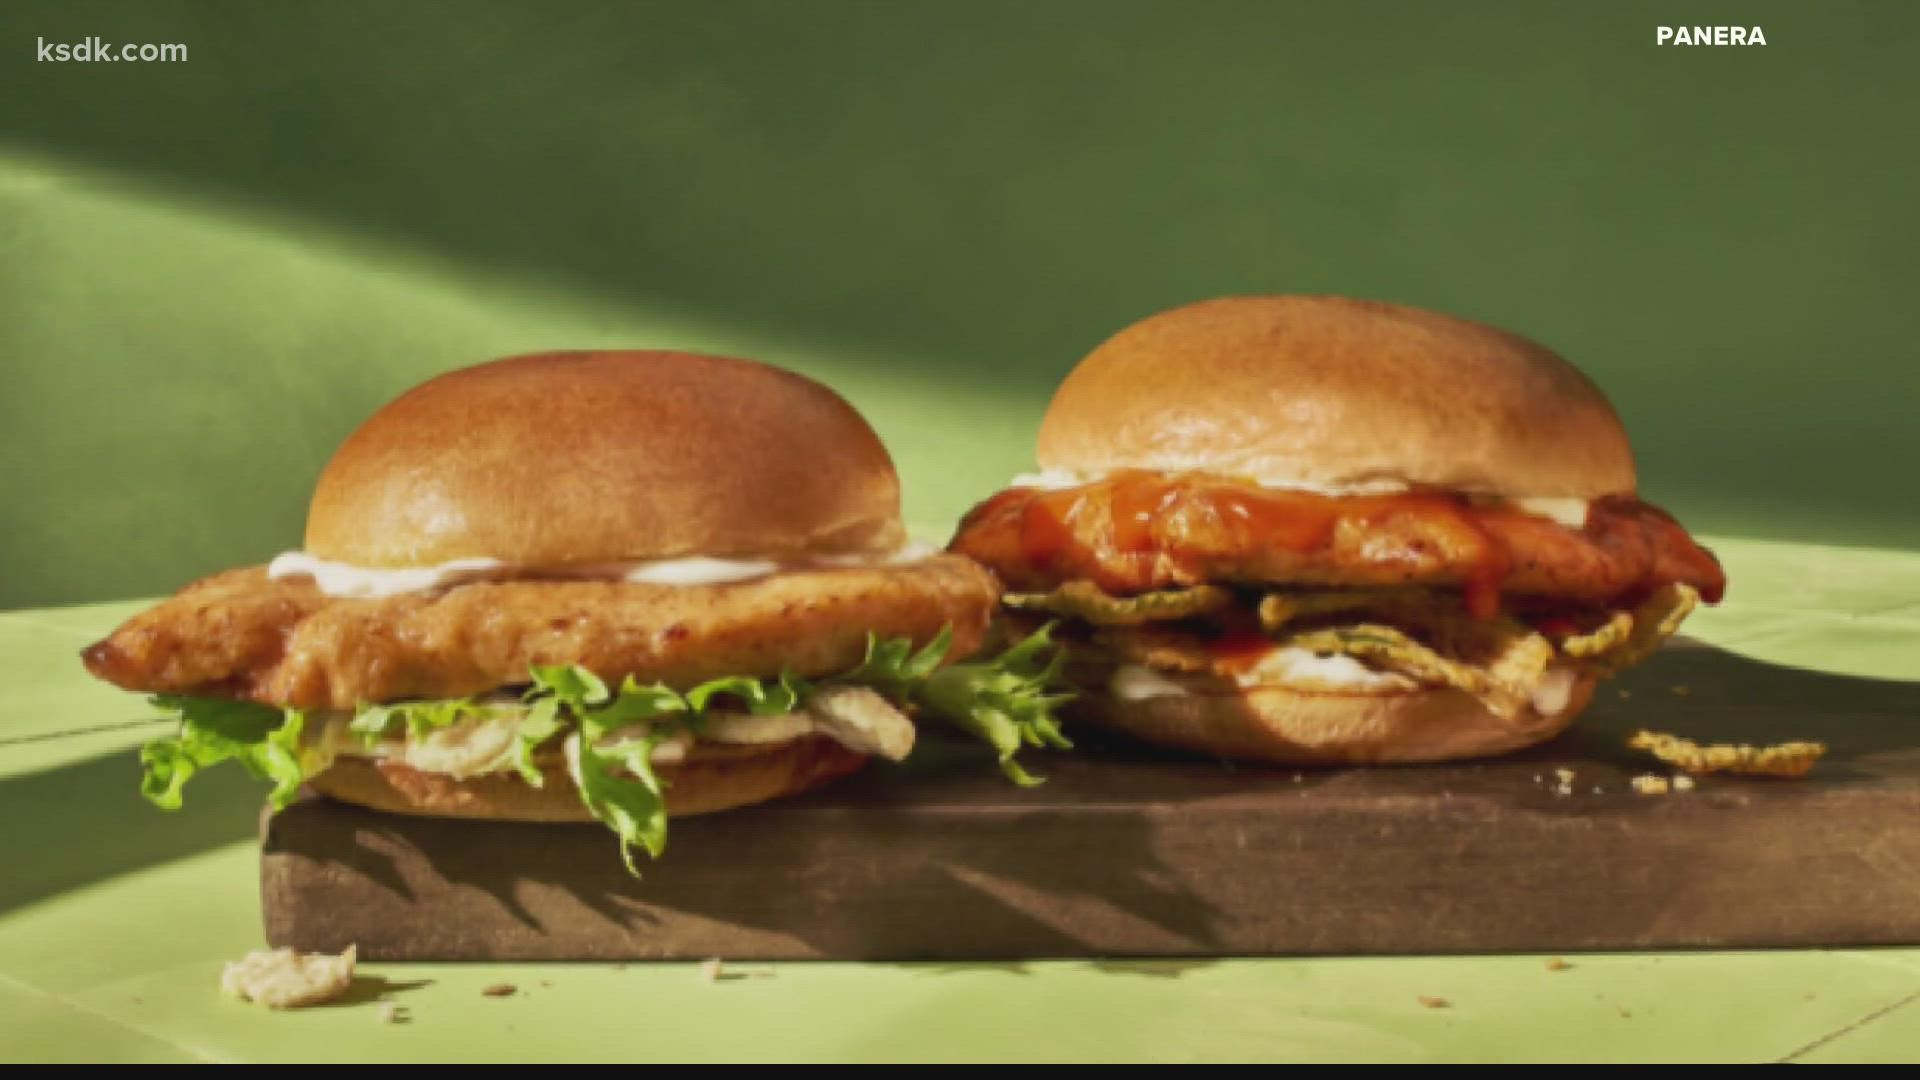 On March 30, Panera will begin selling two versions of its Chef's Chicken Sandwich with a quarter-pound of all-white-meat chicken breast filet.